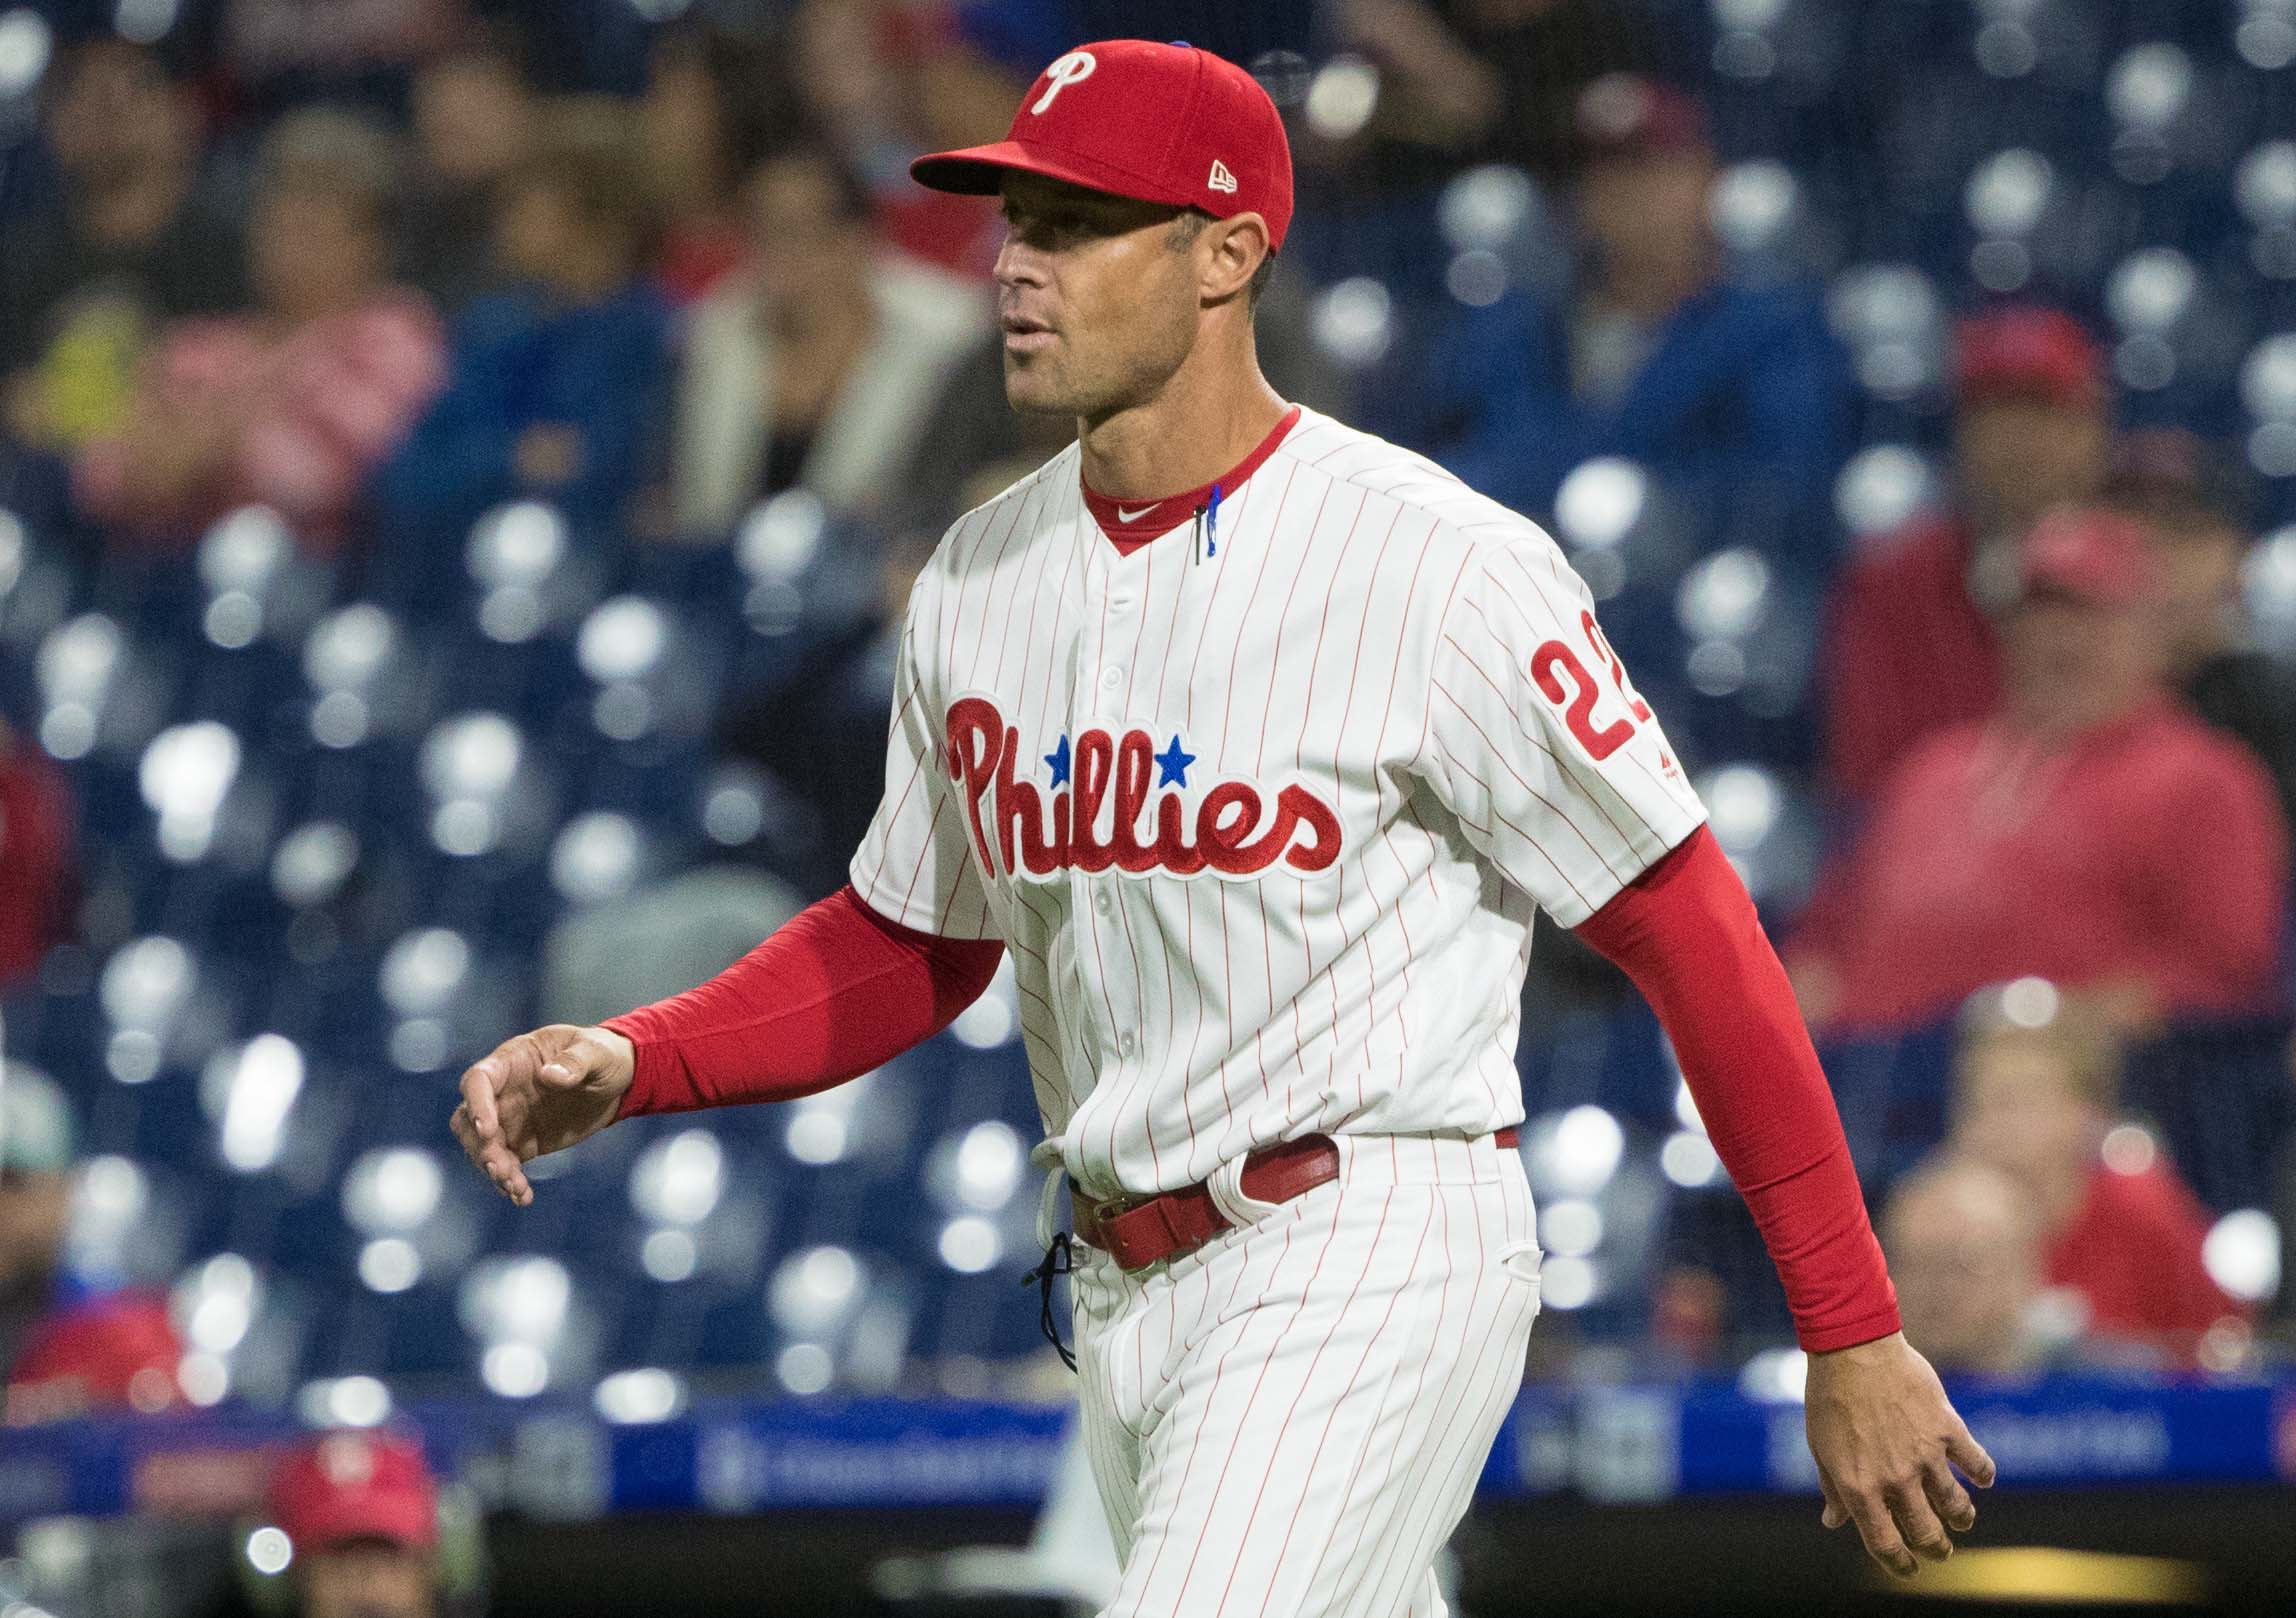 Report: Gabe Kapler Connection in FBI and Department of Justice Baseball Probe